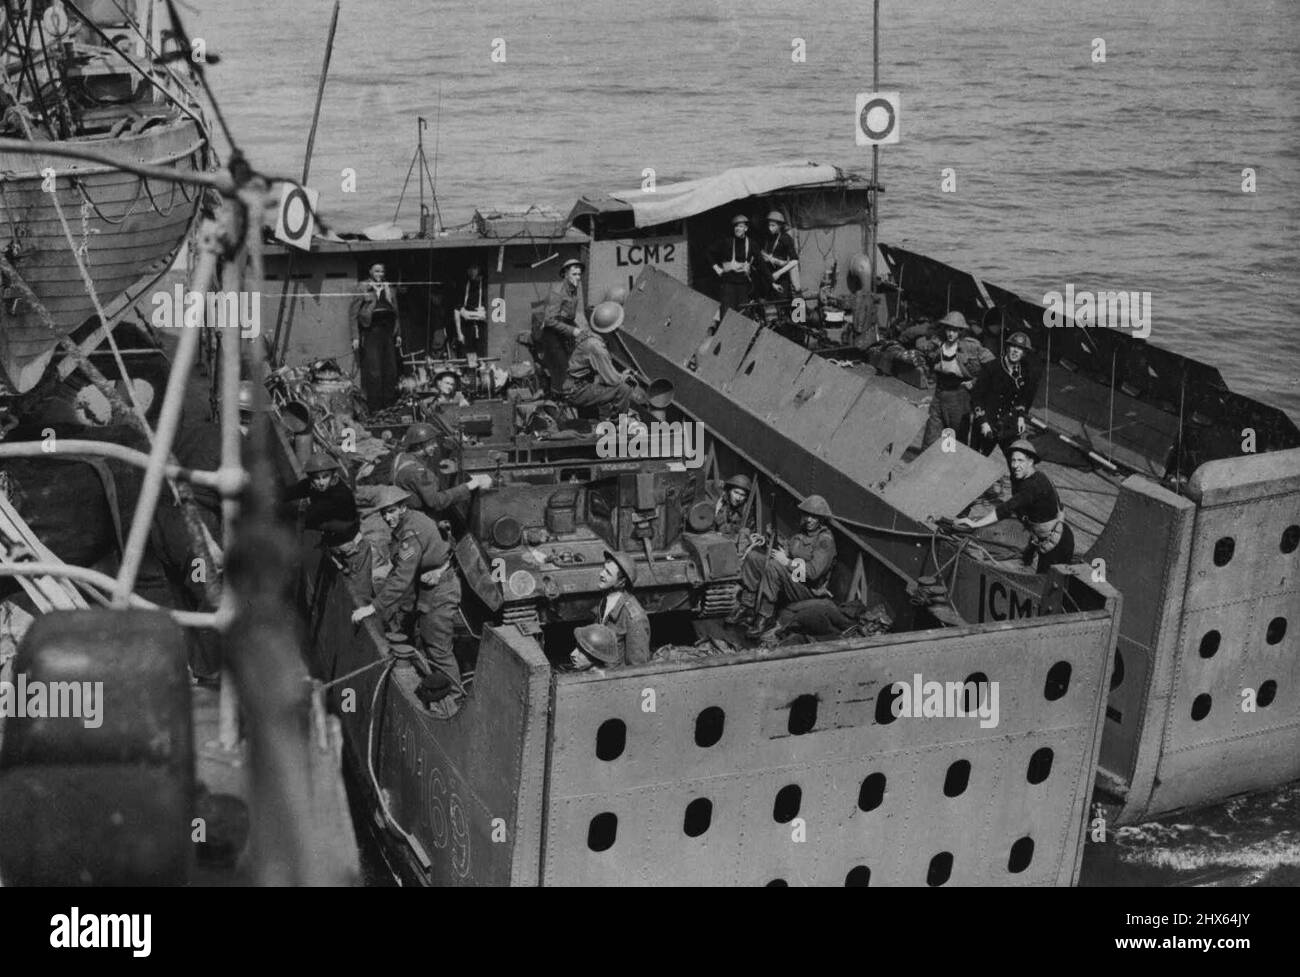 British Troops in tank landing craft returned home after Dieppe Raid. October 4, 1942. (Photo by British Official Photograph). Stock Photo